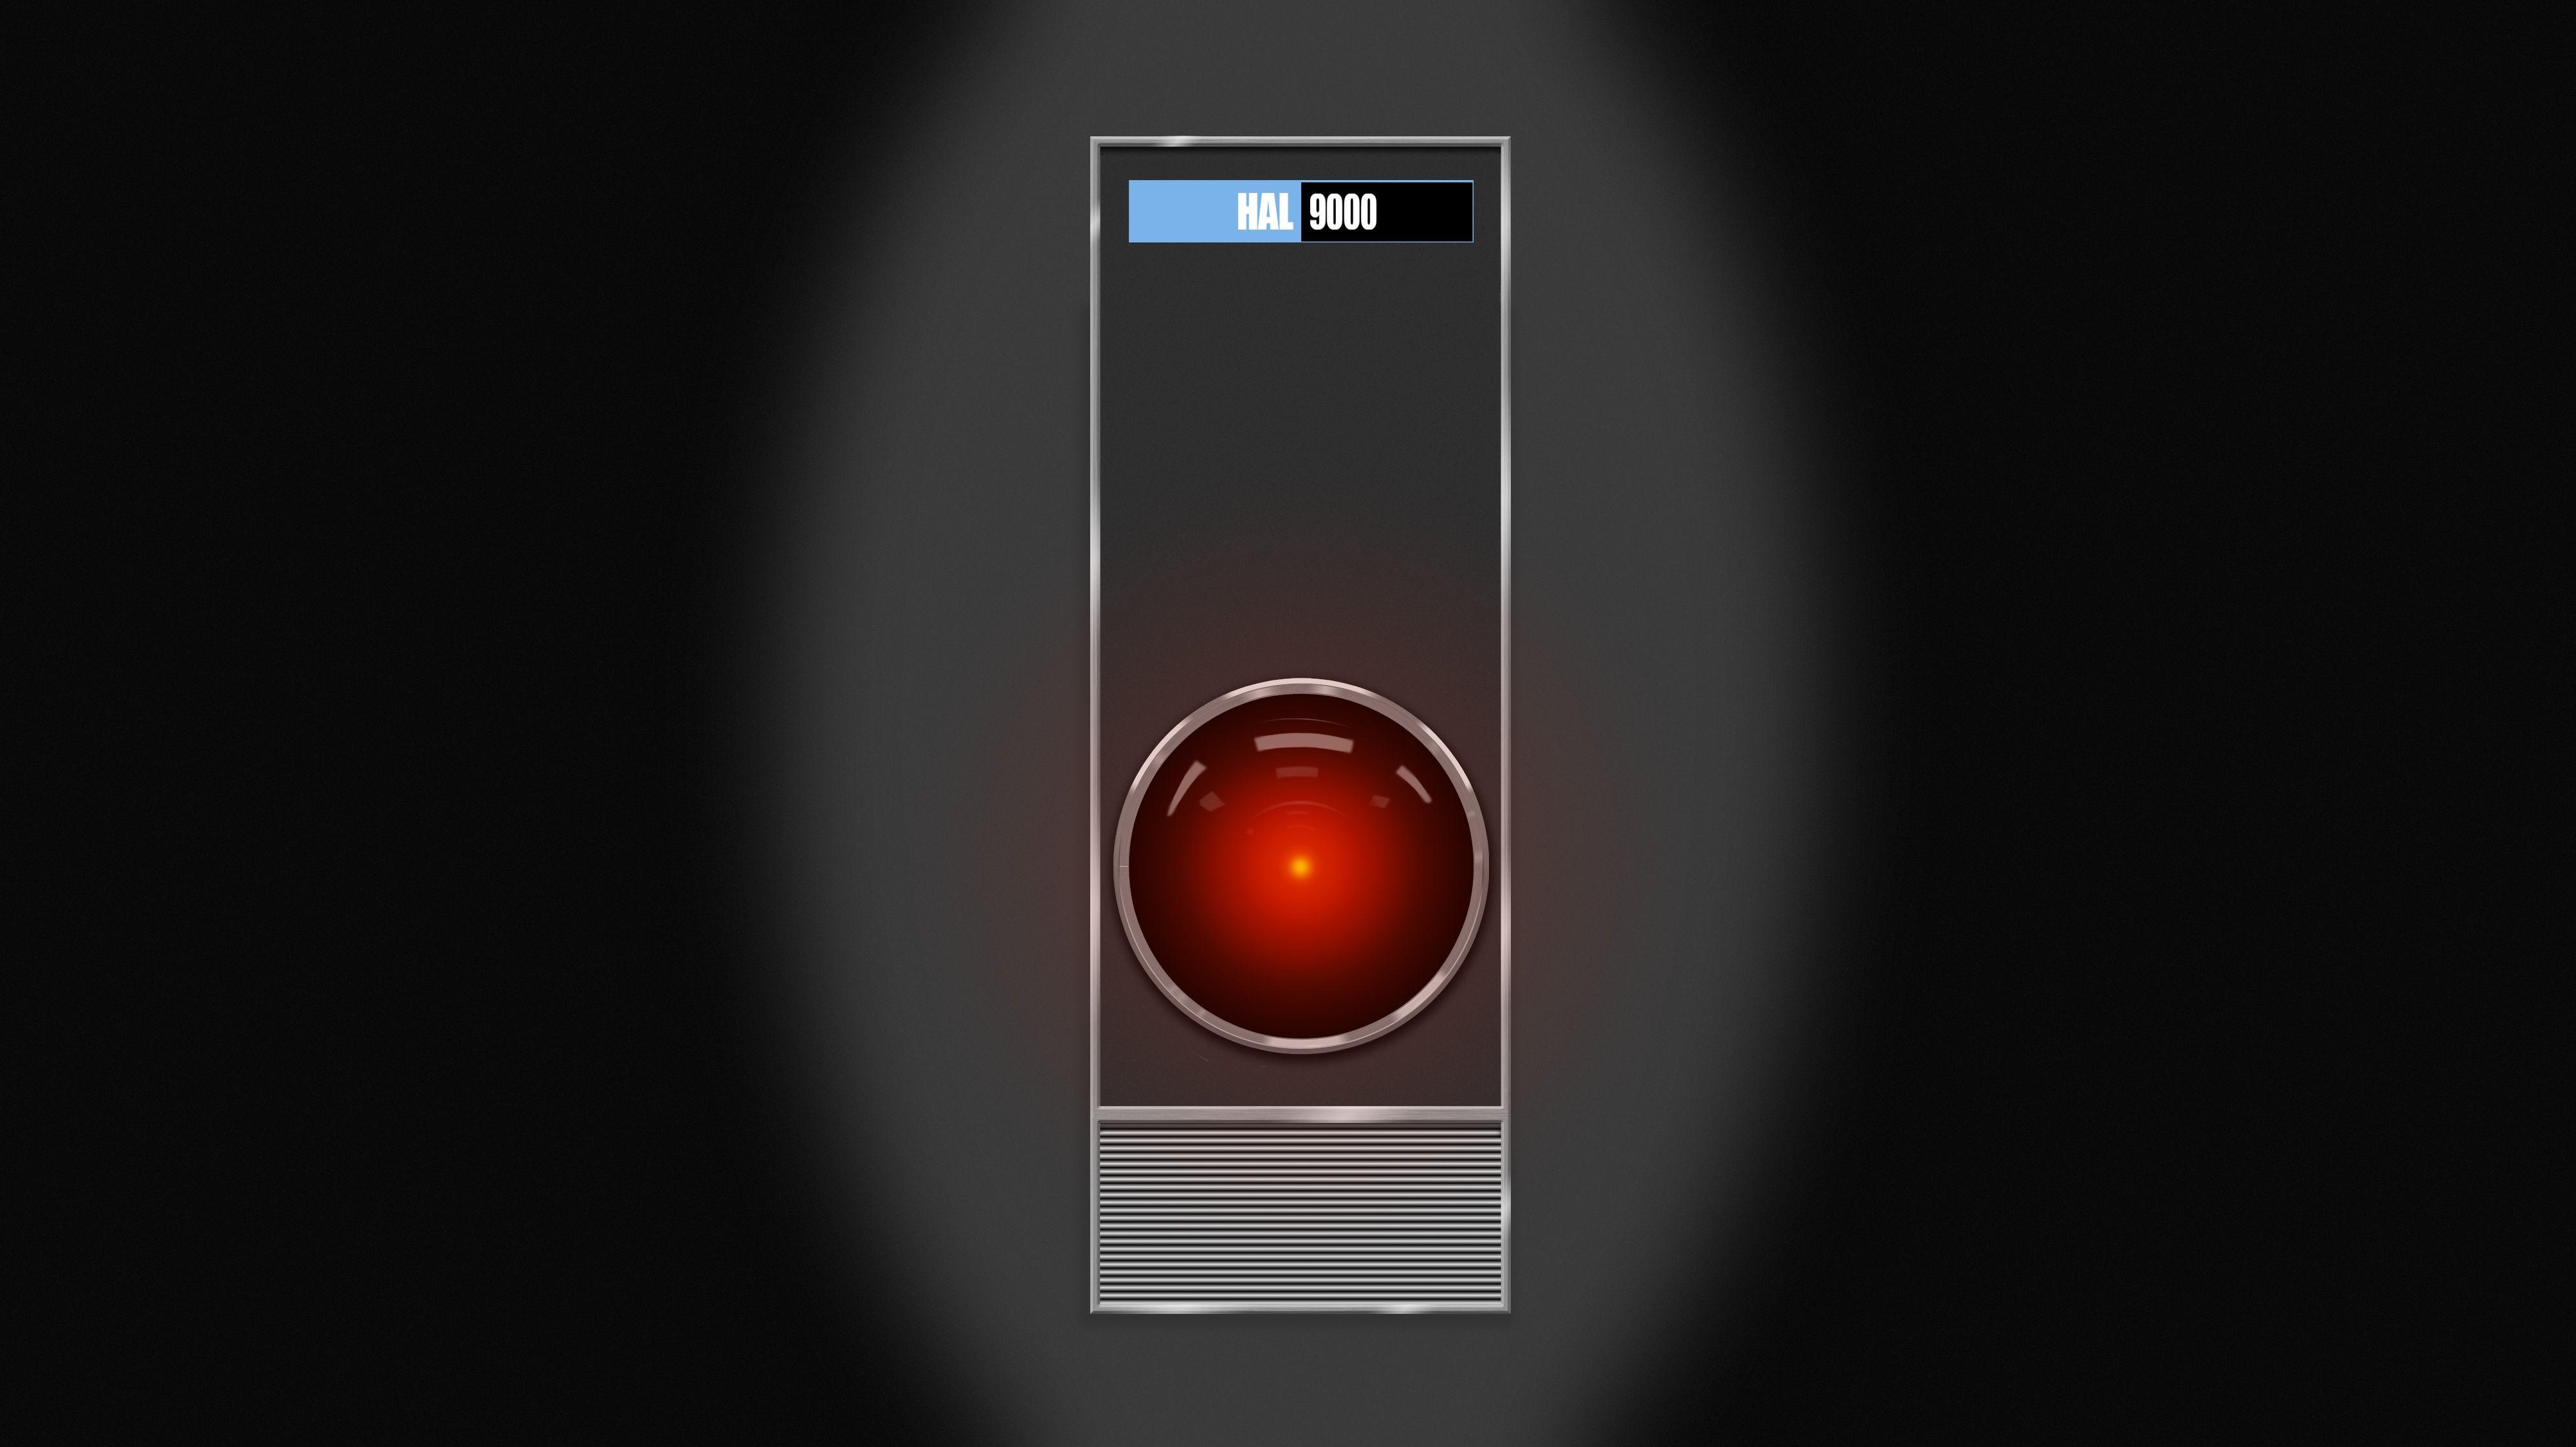 a space odyssey hal9000 4005x2250 wallpaper High Quality